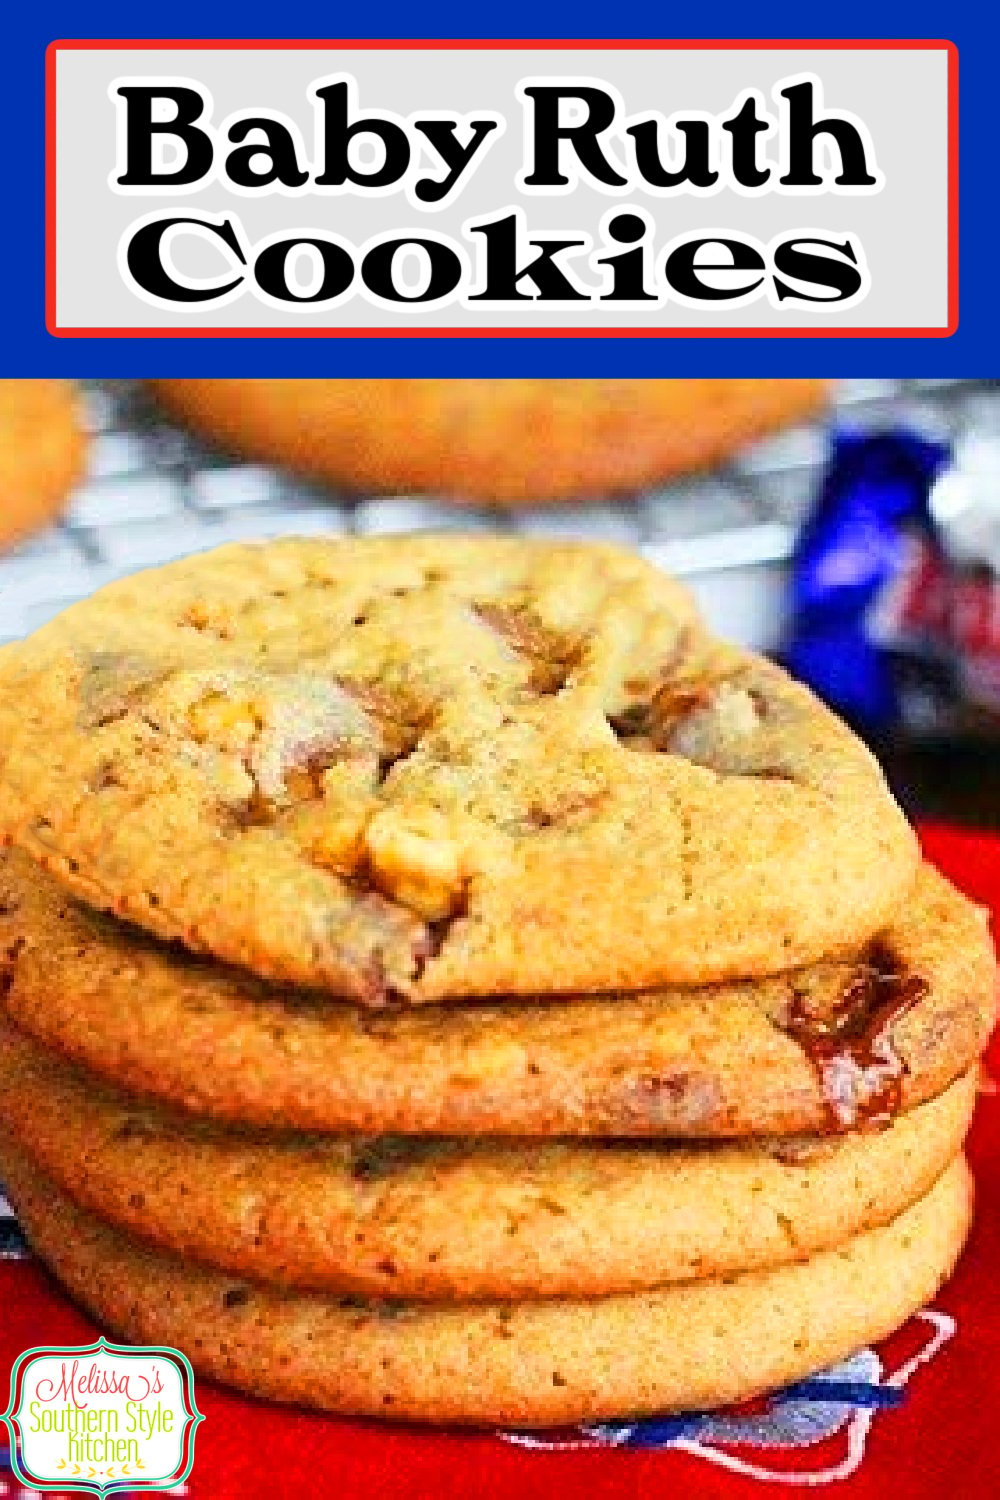 Buttery candy bar Baby Ruth Cookies never last long in your cookie jar #babyruthcookies #babyruthcandy #candybarcookies #peanutbuttercookies #peanutbutter #peanuts #cookierecipes #holidaybaking #desserts #dessertfoodrecipes #southernfood #southernrecipes via @melissasssk